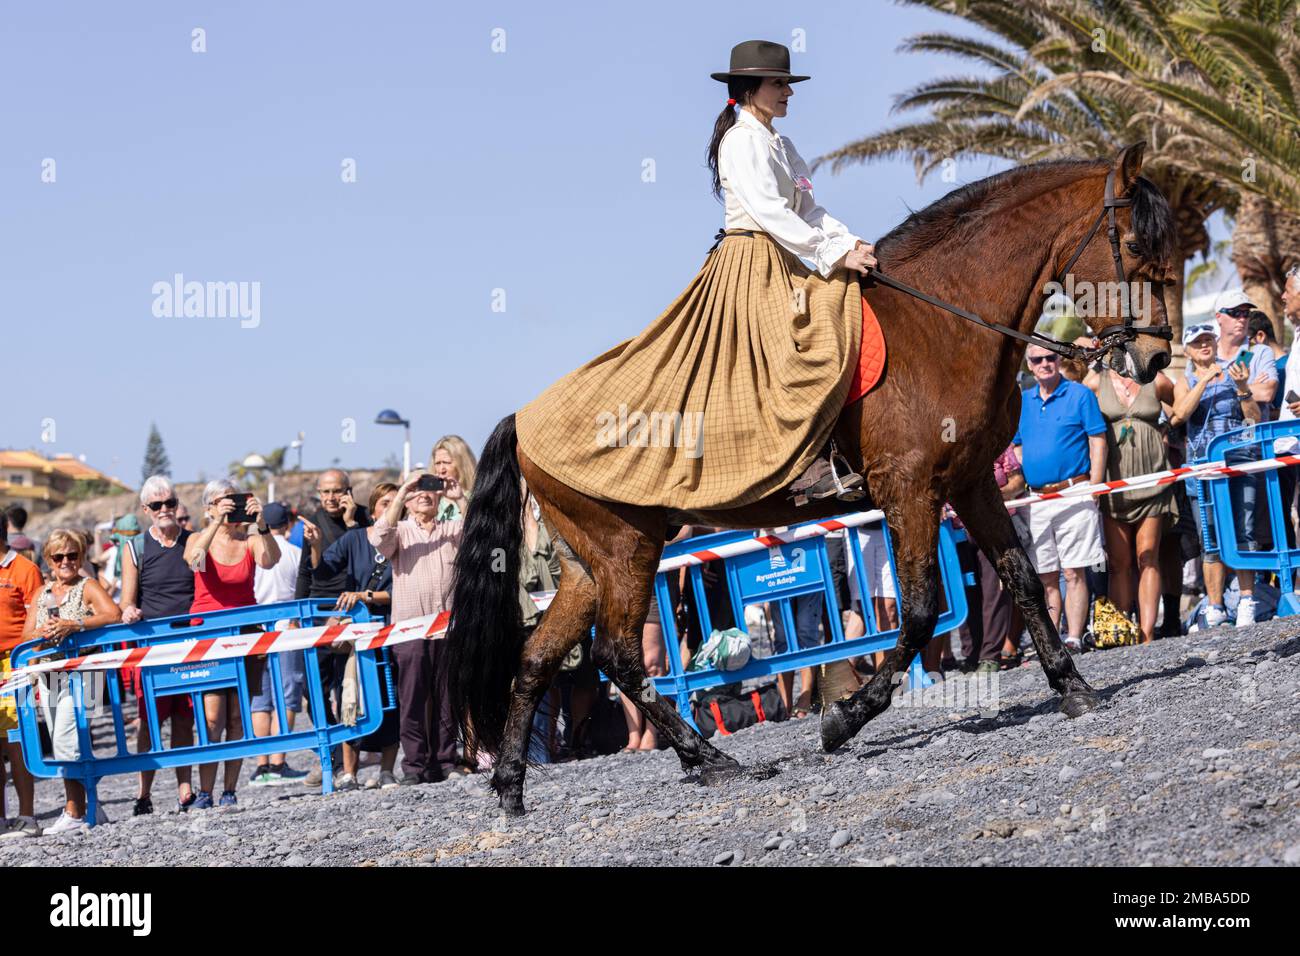 Costa Adeje, Tenerife, Canary Islands, 20 January 2023. Leaving the beach after bathing the horses at the fiesta of San Sebastian which returns for the first time since 2020 due to the covid pandemic restrictions. The annual fiesta in La Caleta on the Costa Adeje is enjoyed by locals and tourists who gather to see the many horses that come to bathe in the sea at the Playa Enramada beach. Credit: Phil Crean A/Alamy Live News Stock Photo